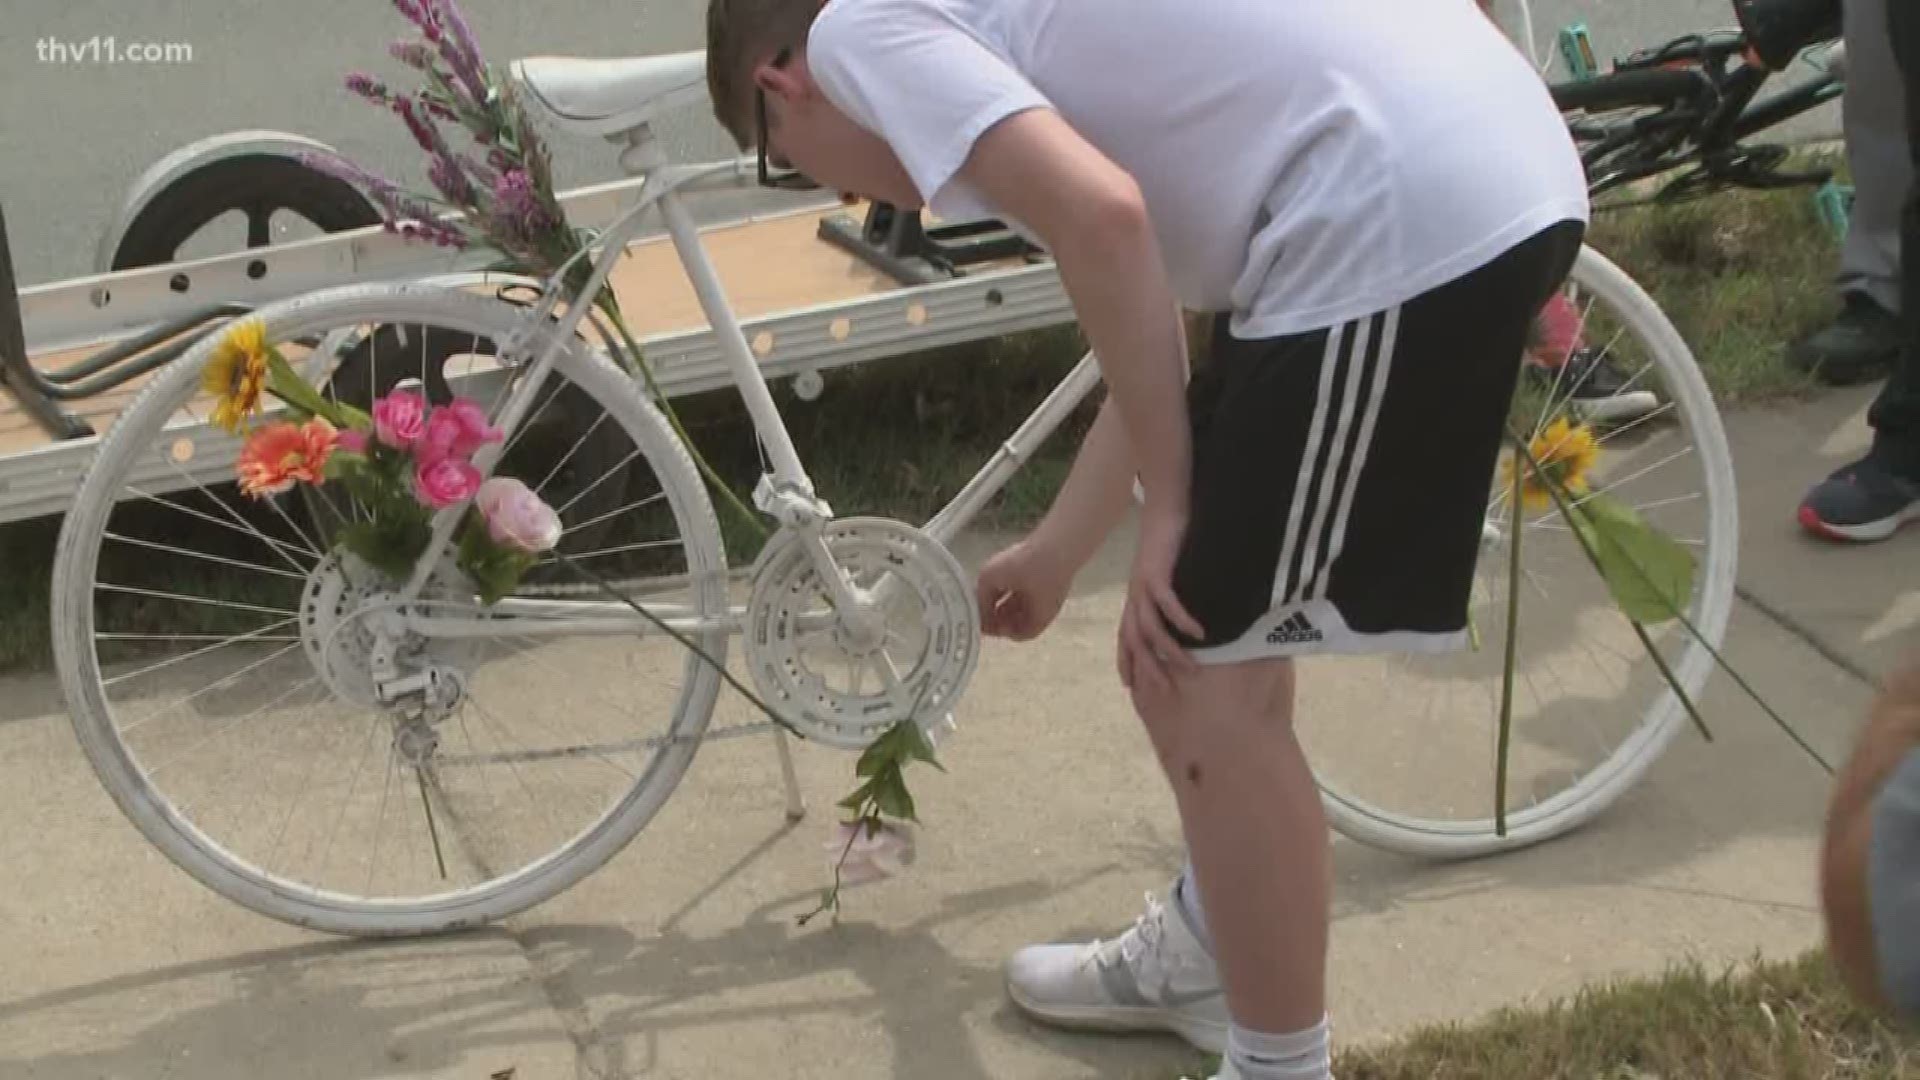 A Ghost Bike marks the spot where avid cyclist John Mundell was hit by a car that drove off.